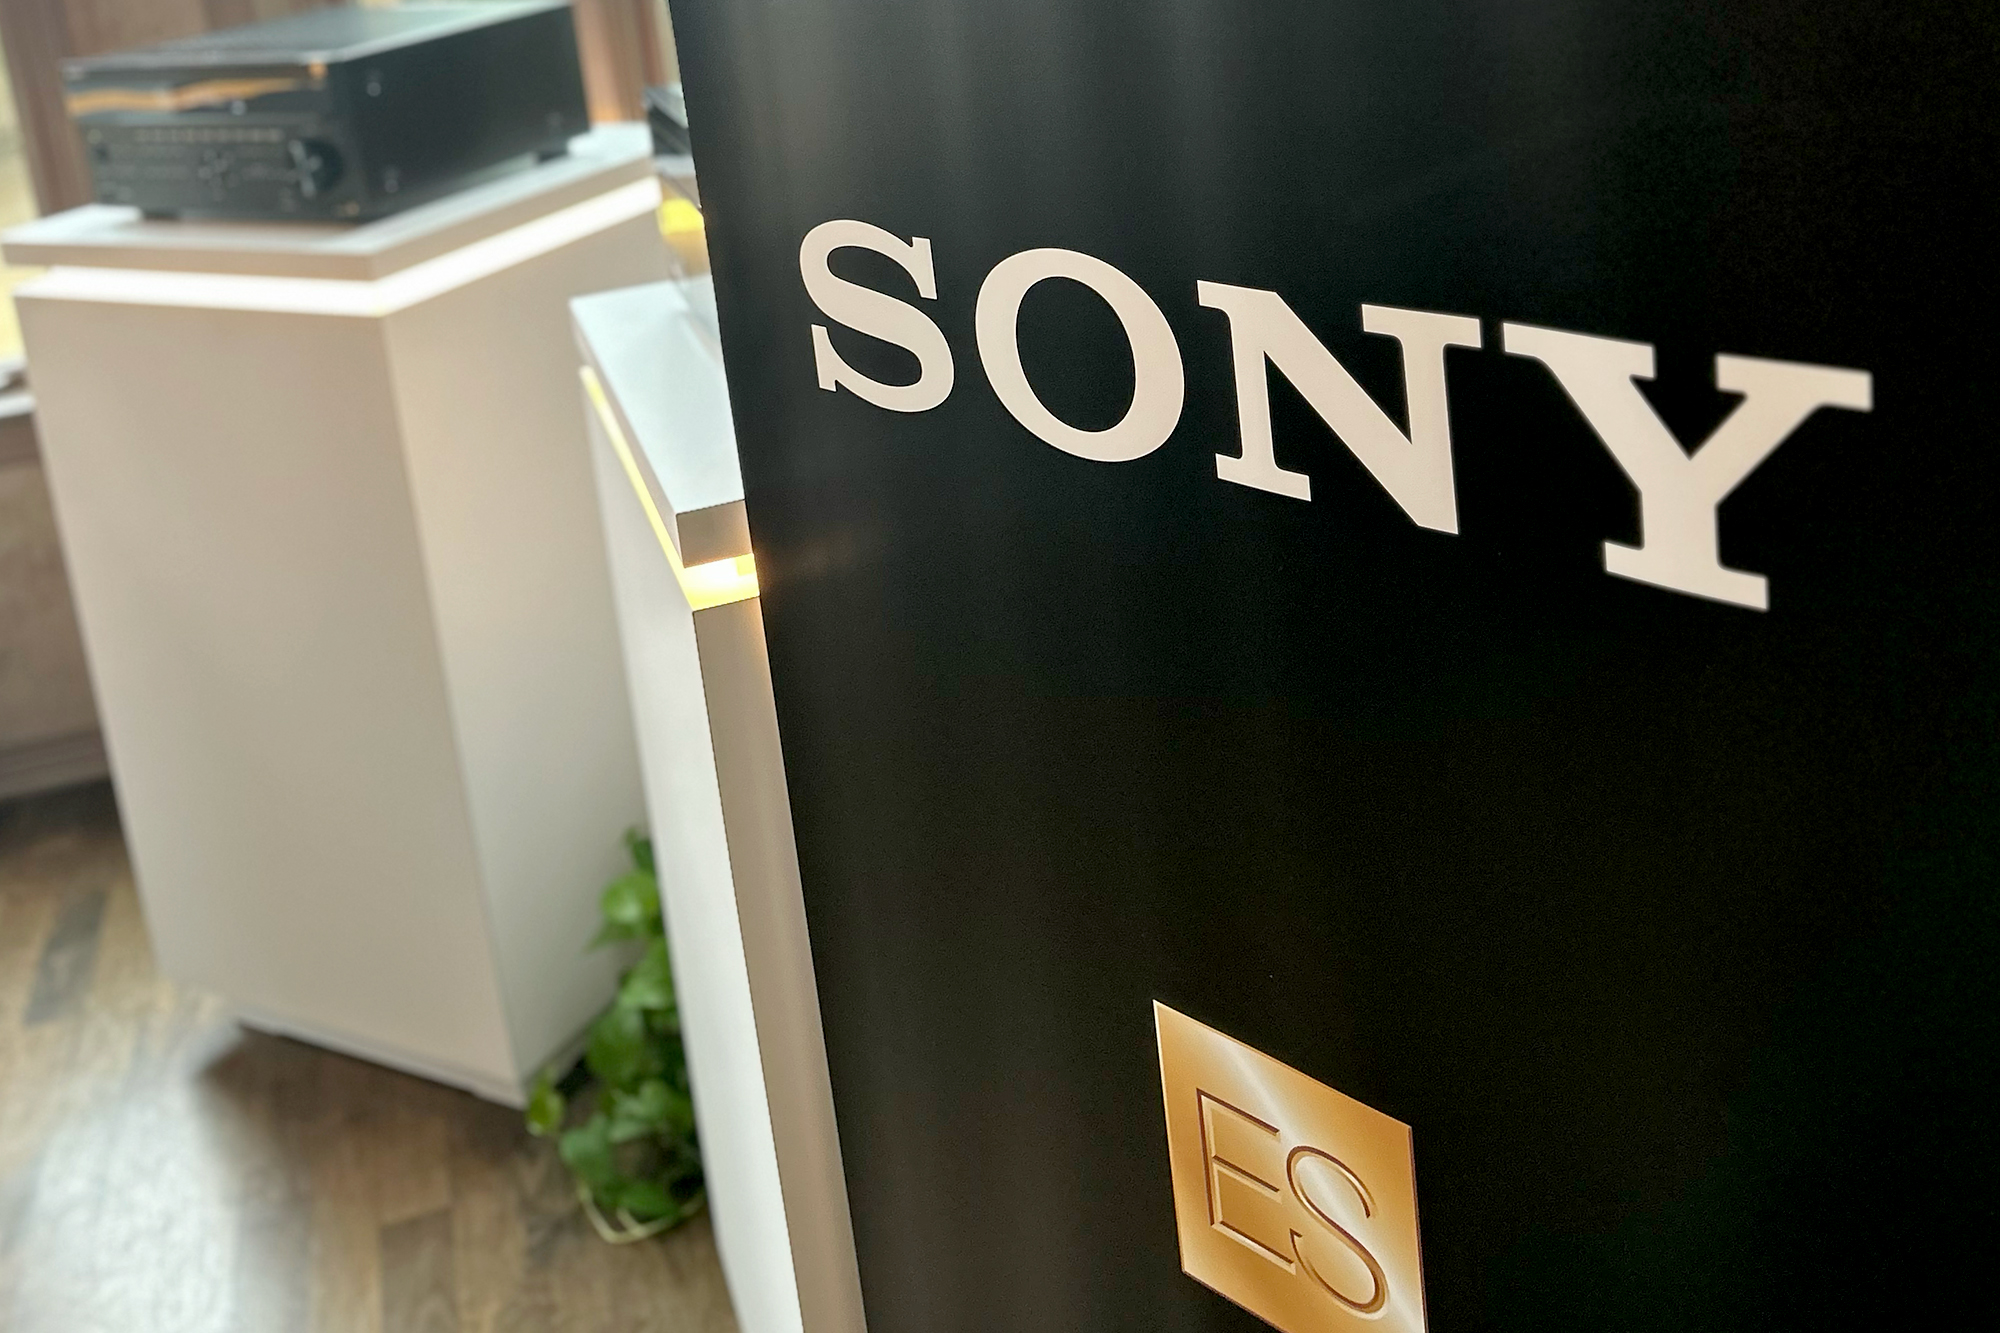 We saw Sony's new ES receivers and Bravia XR TVs and lived to tell you  about them